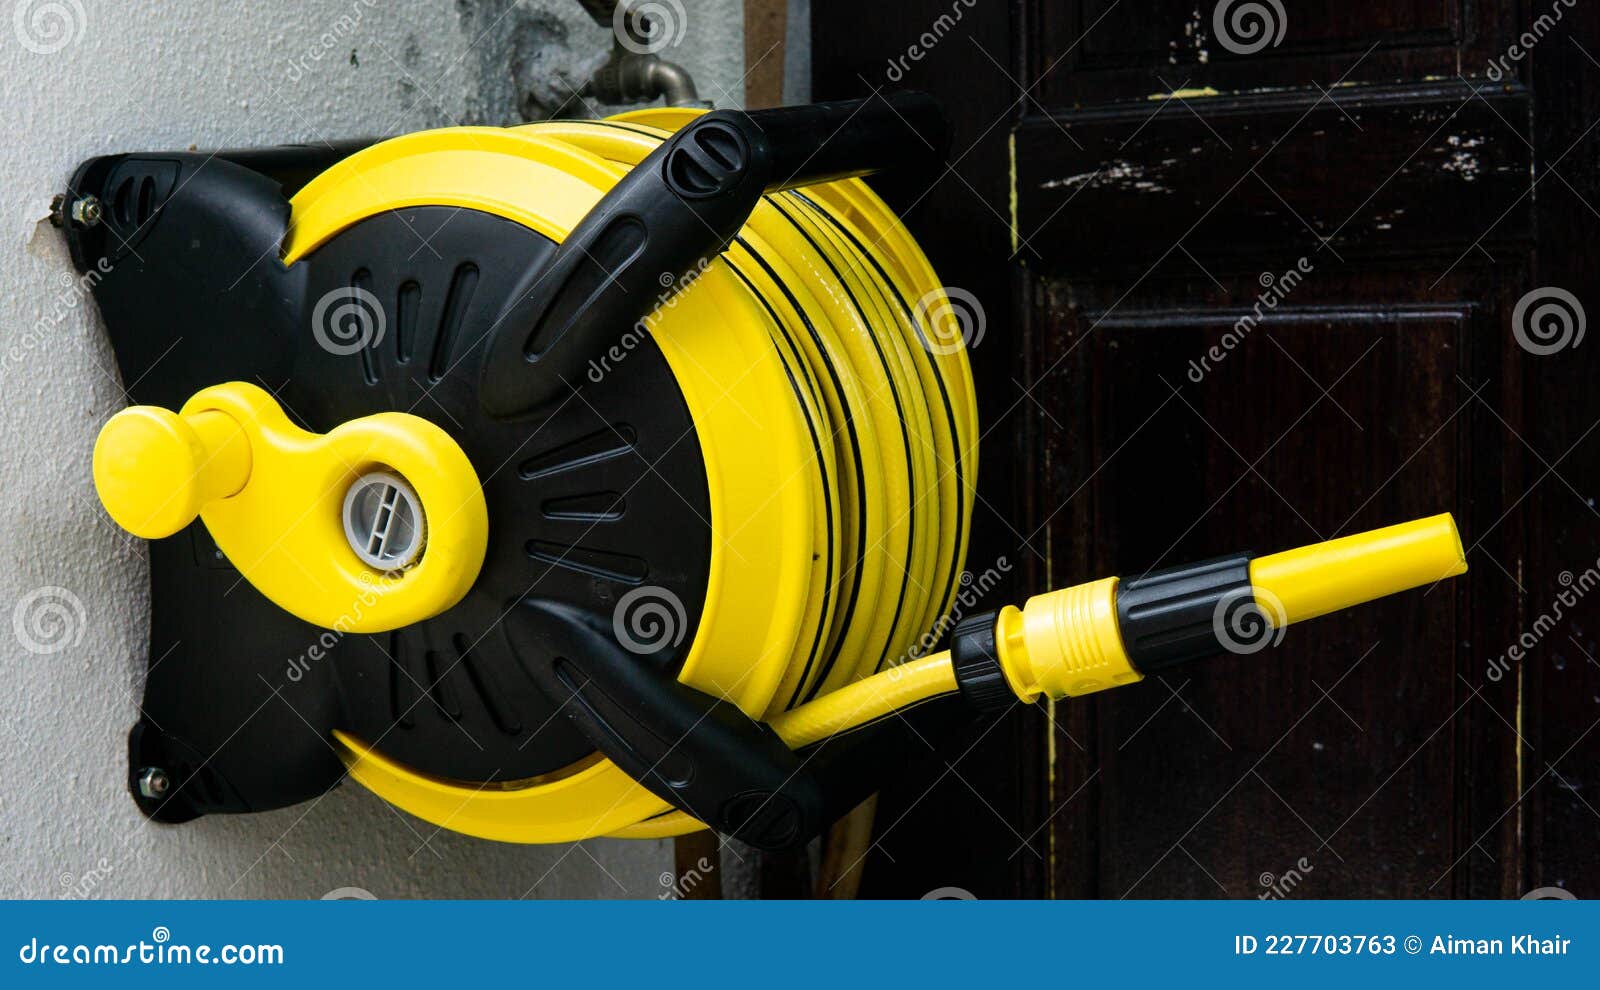 A Yellow Wall Mounted Garden Water Hose Reel with Sprinkler or Sprayer  Stock Image - Image of pipe, hose: 227703763